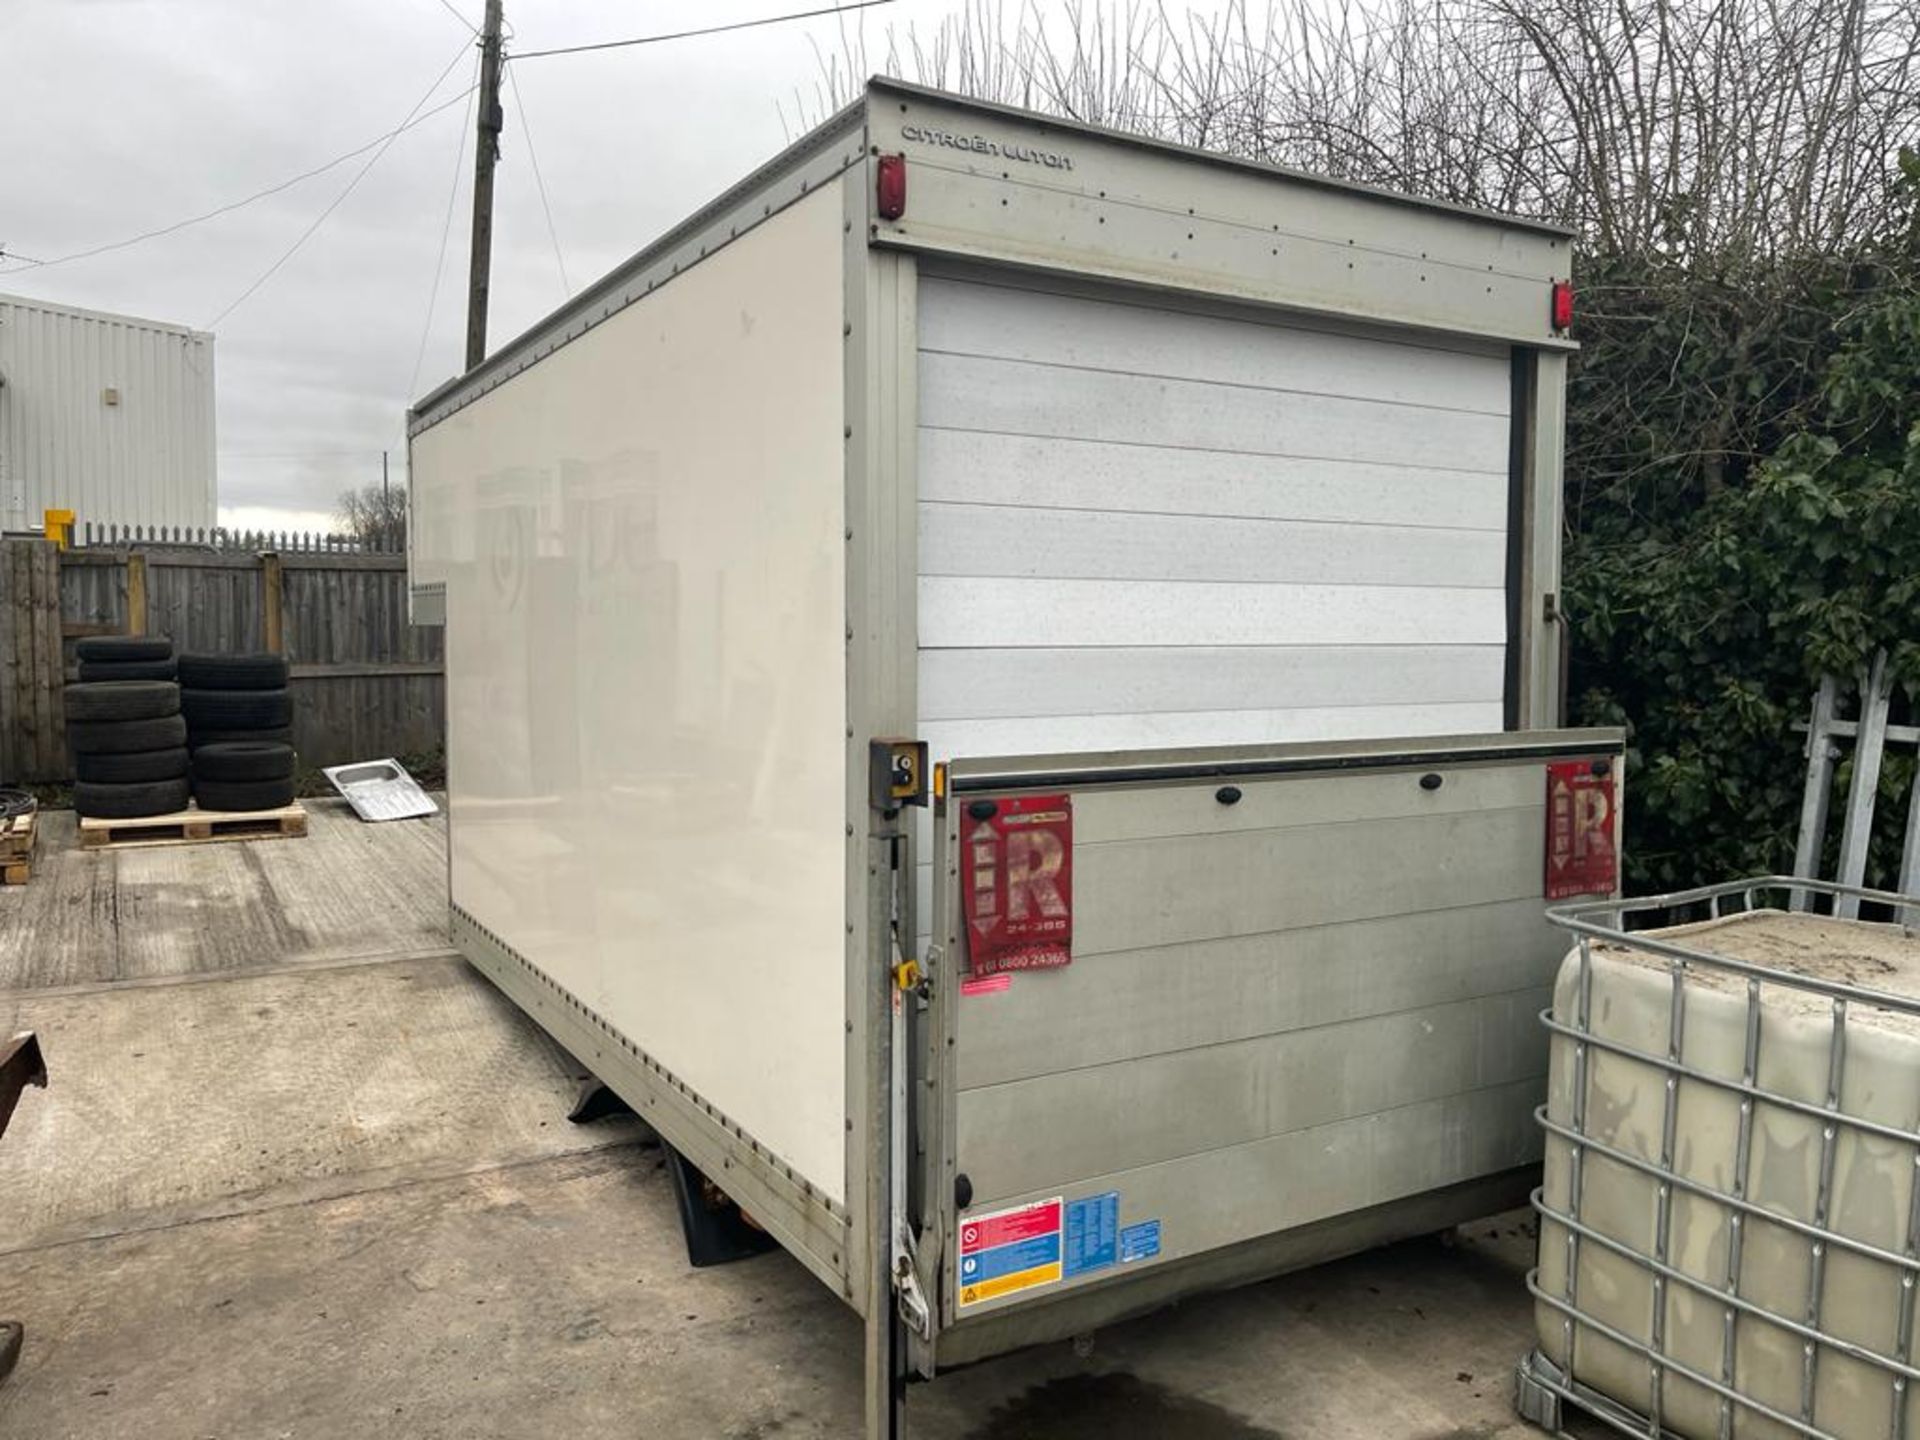 LWB 2016 LUTON BOX, EXCELLENT CONDITION, NO DAMAGE, 13'8 BOX, 17'9 OVERALL WITH 4ft NOSE *NO VAT* - Image 3 of 11